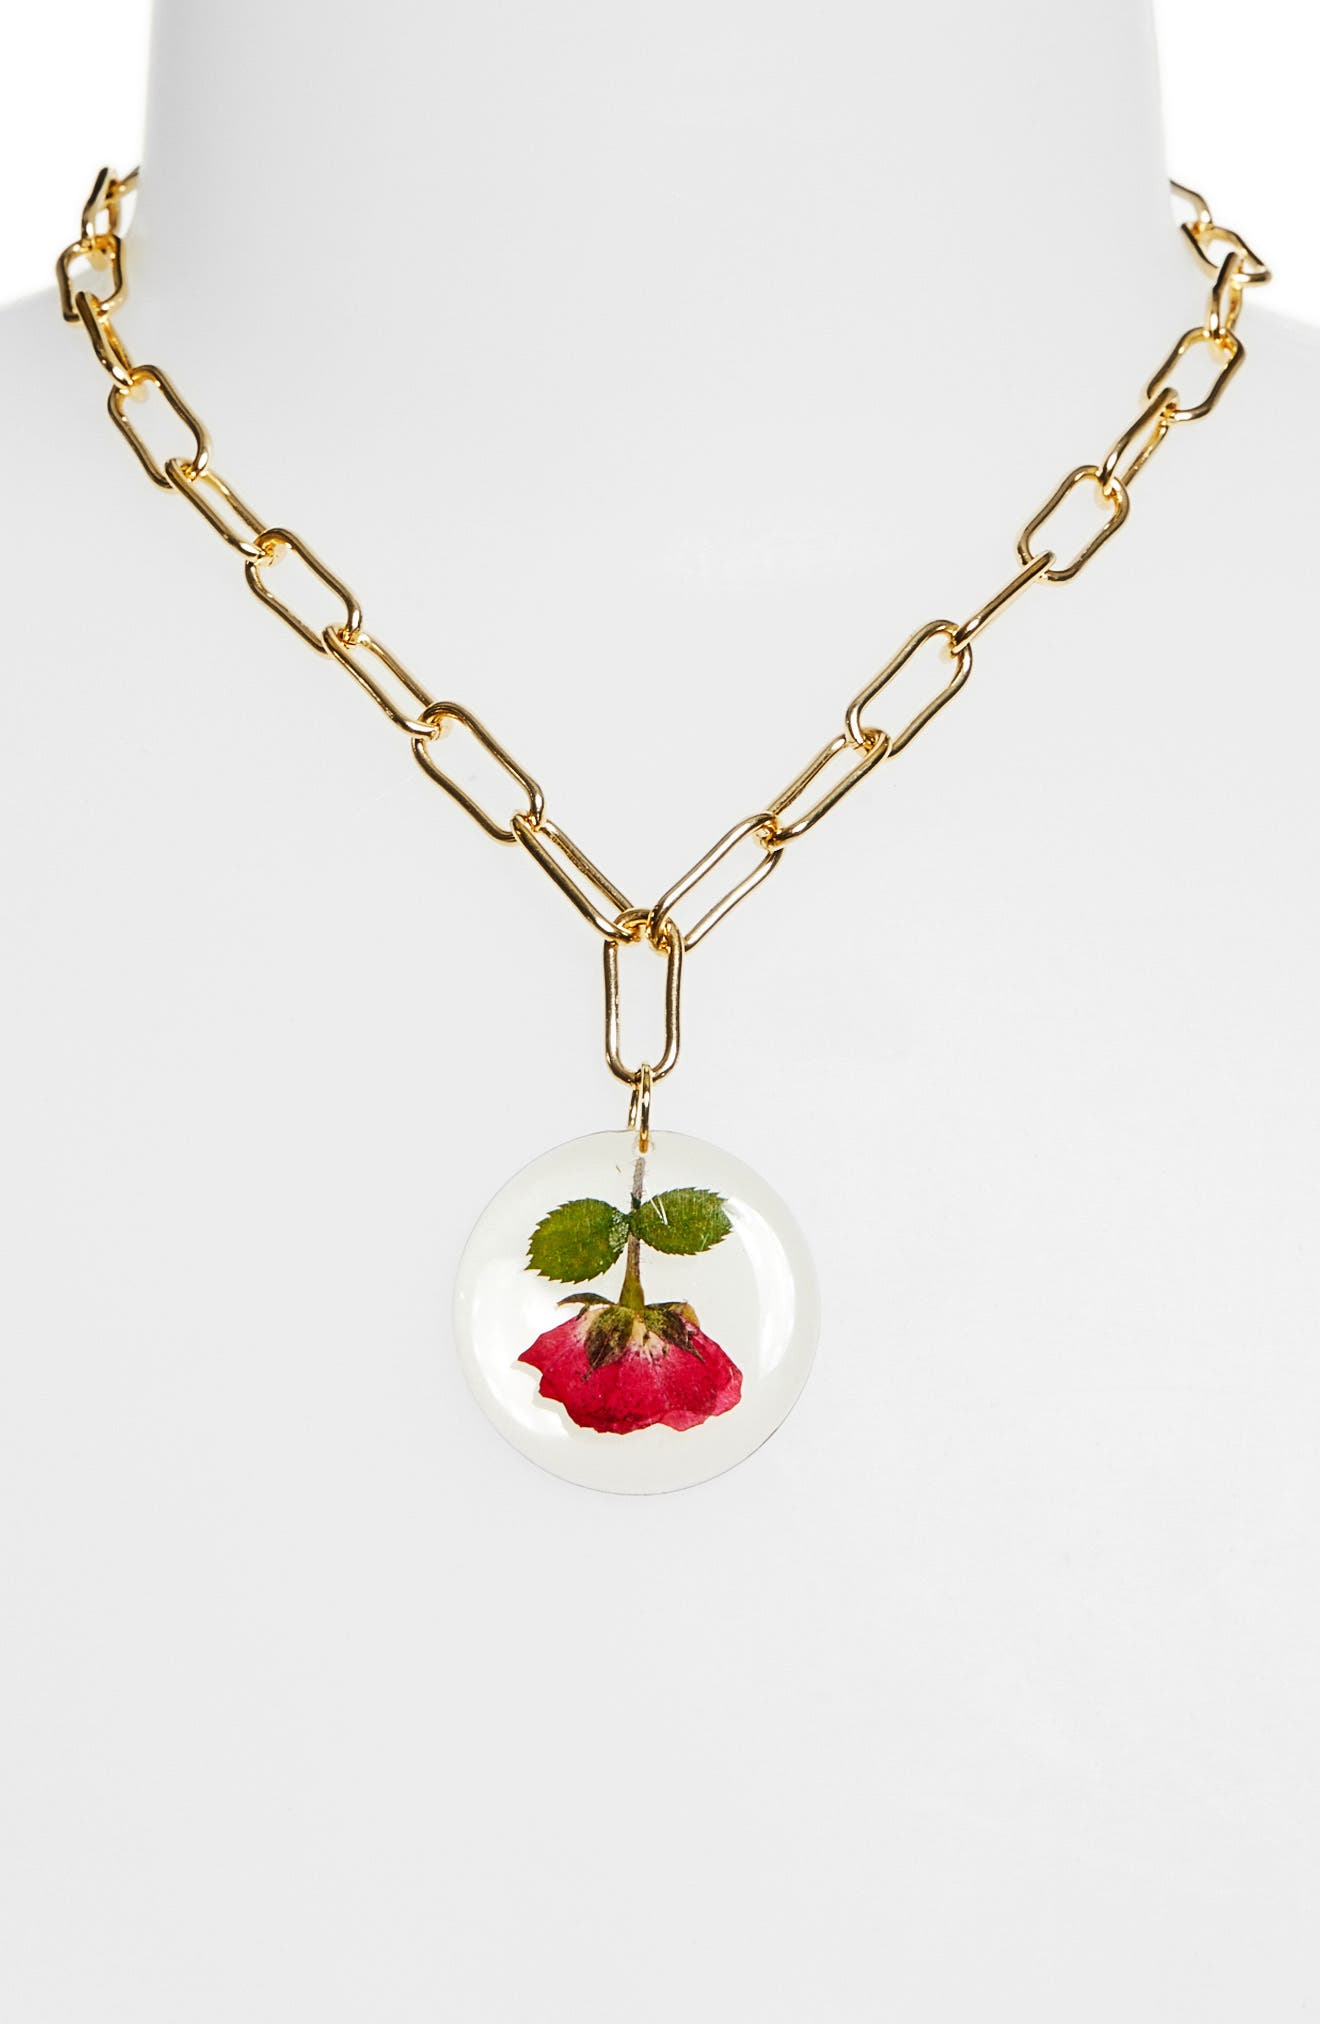 Dauphinette Phlox Flower Necklace